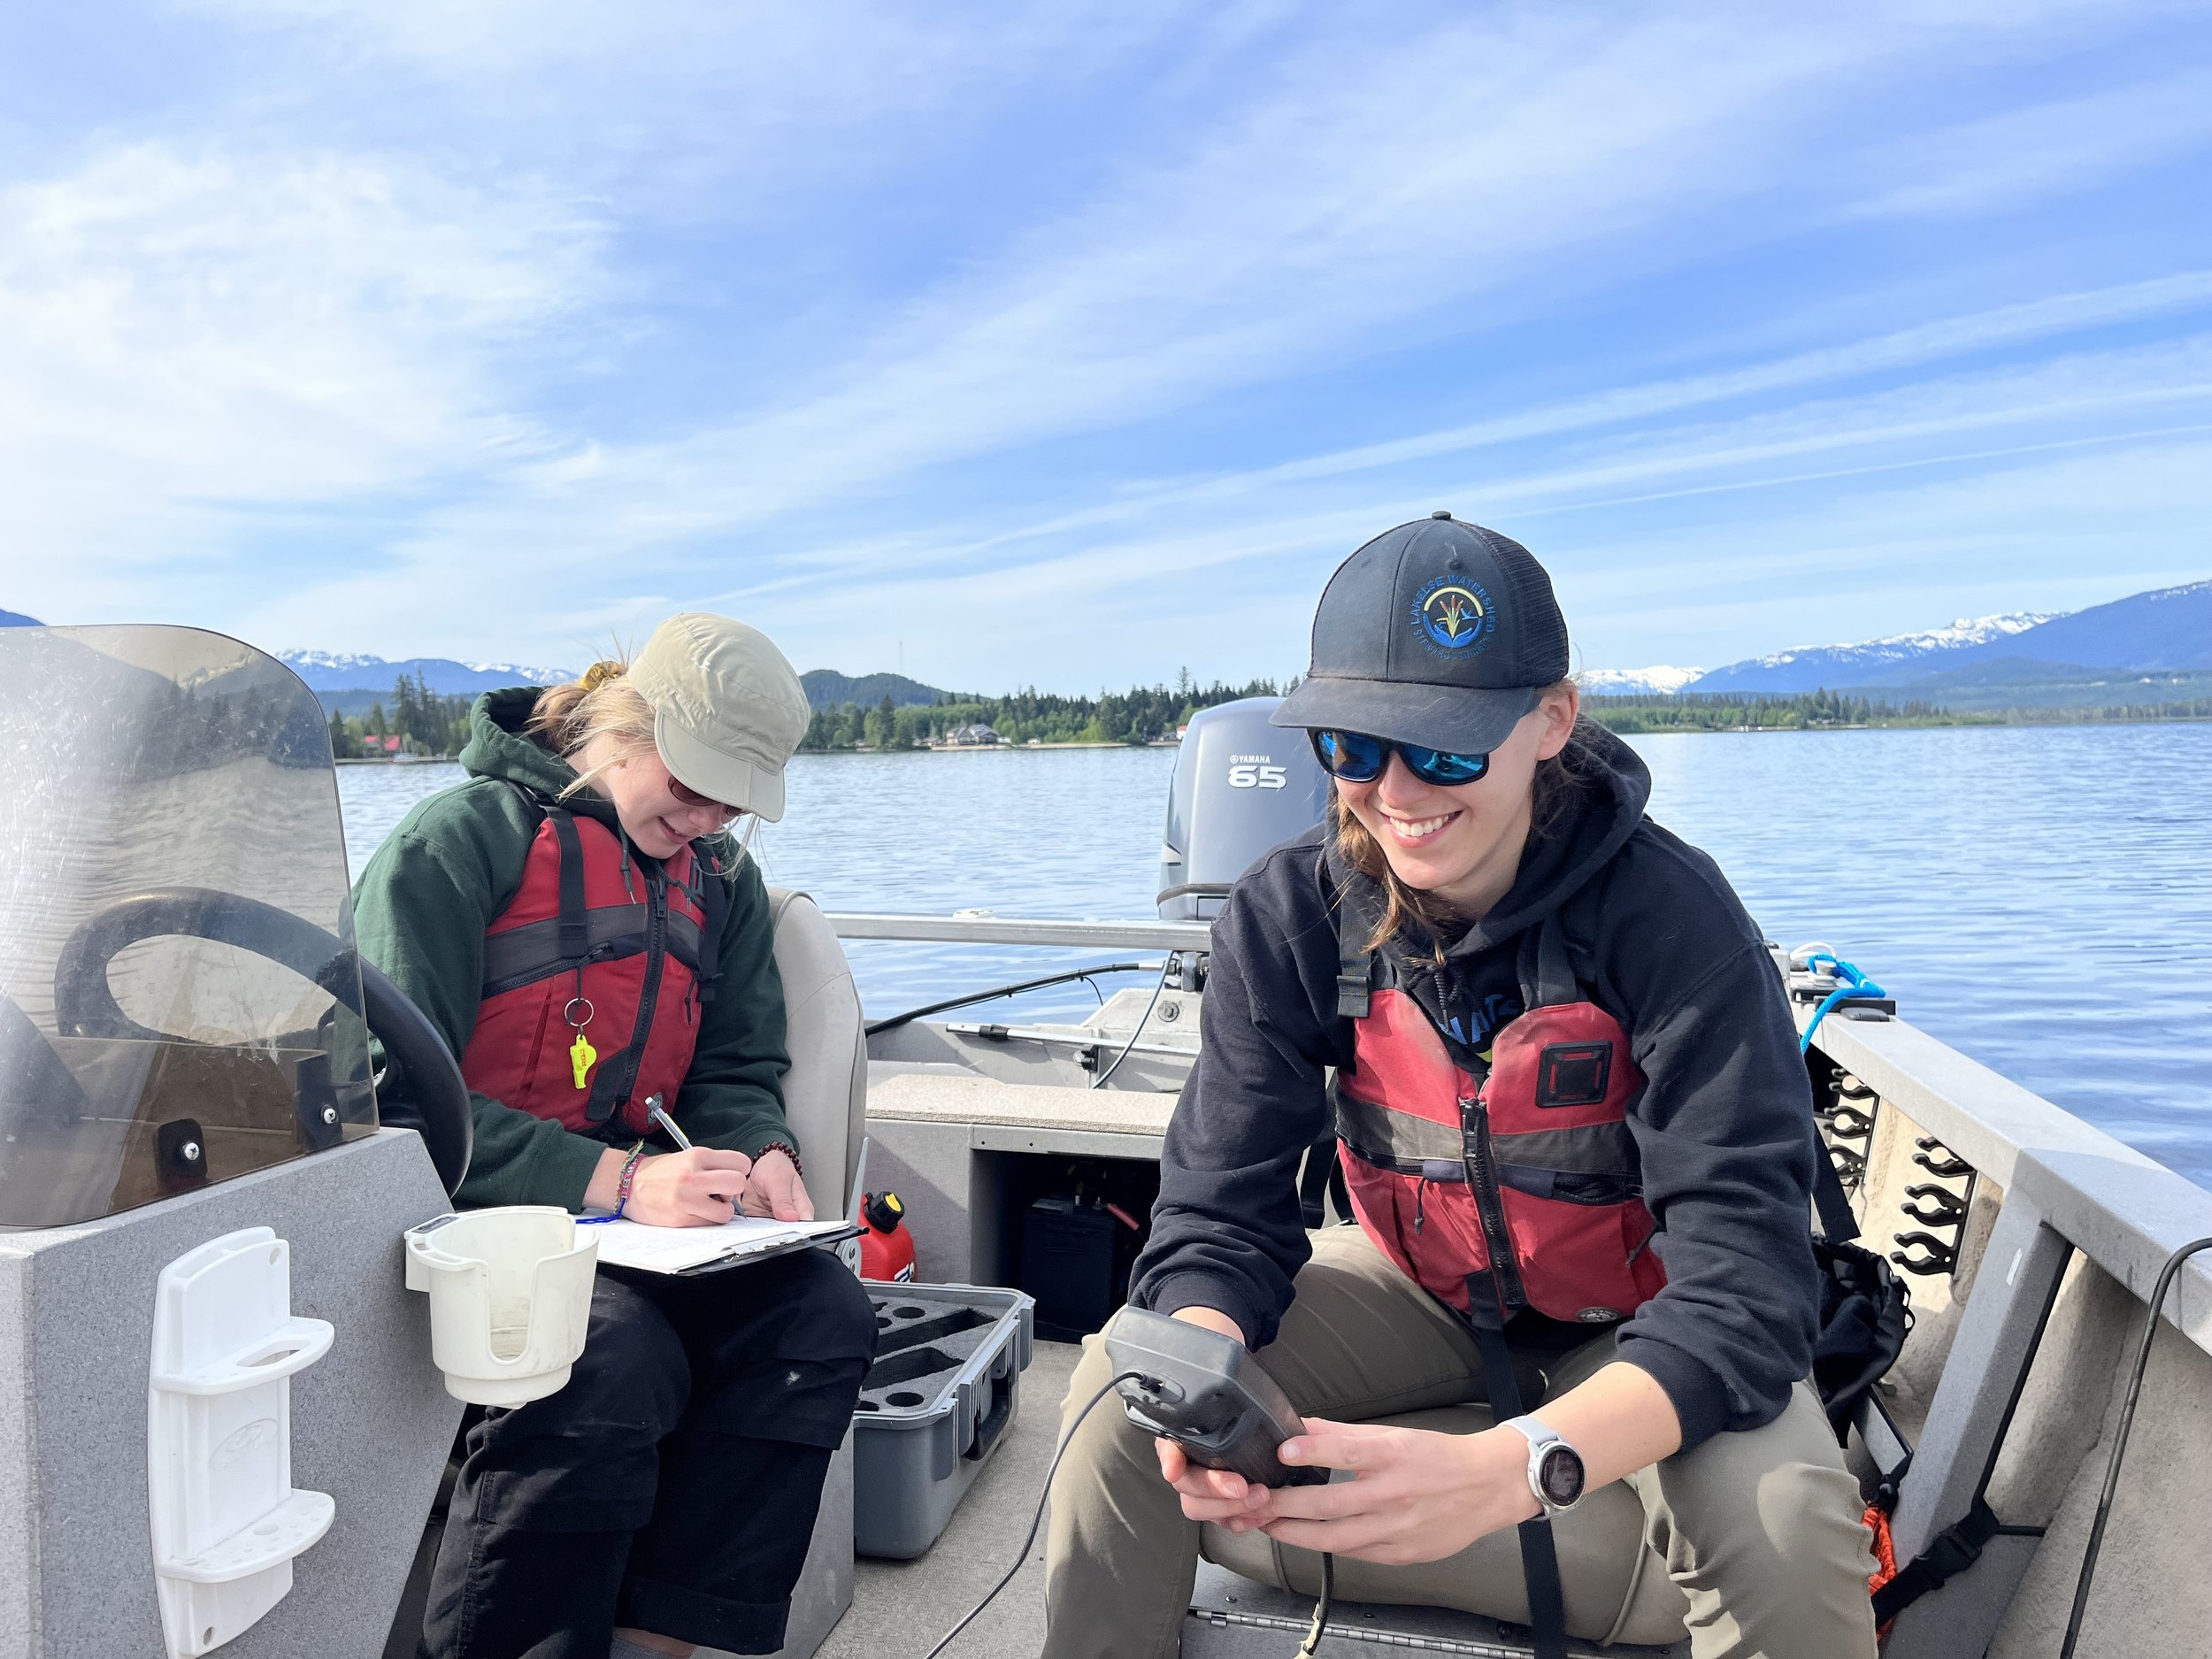 Sampling the water quality of the lake from the boat.